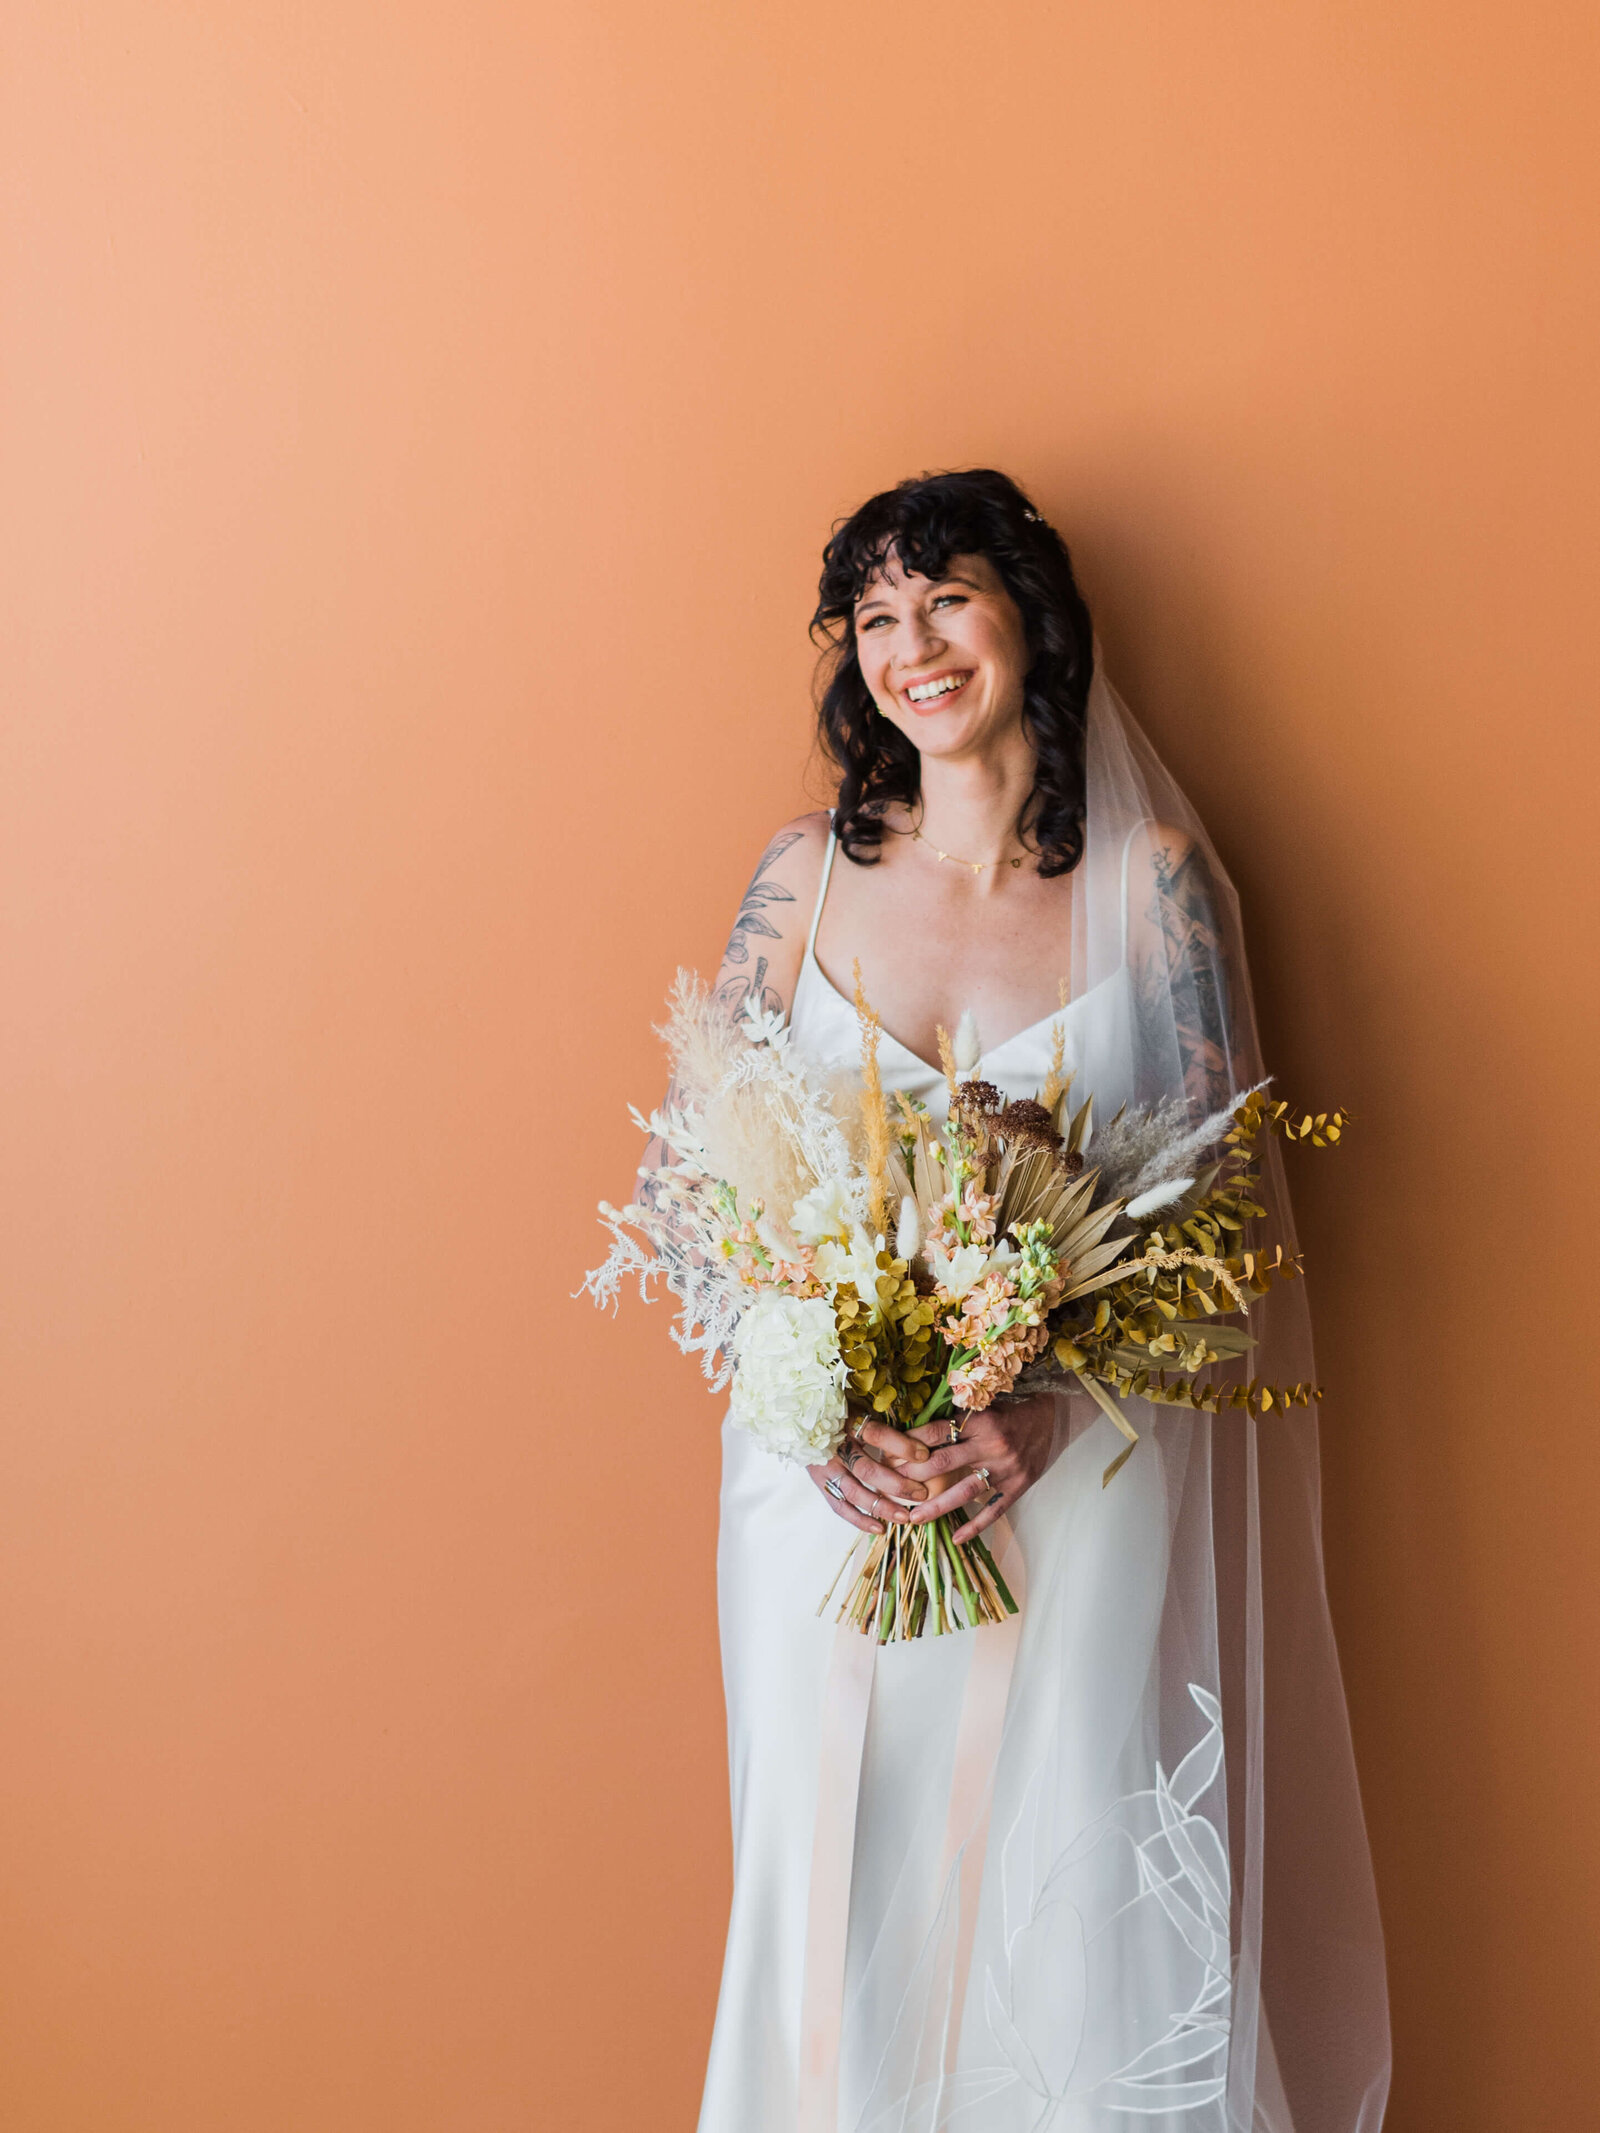 Edgy but beautiful bride in tattooed arms holds a neutrally colored bouquet while standing in front of an orange wall